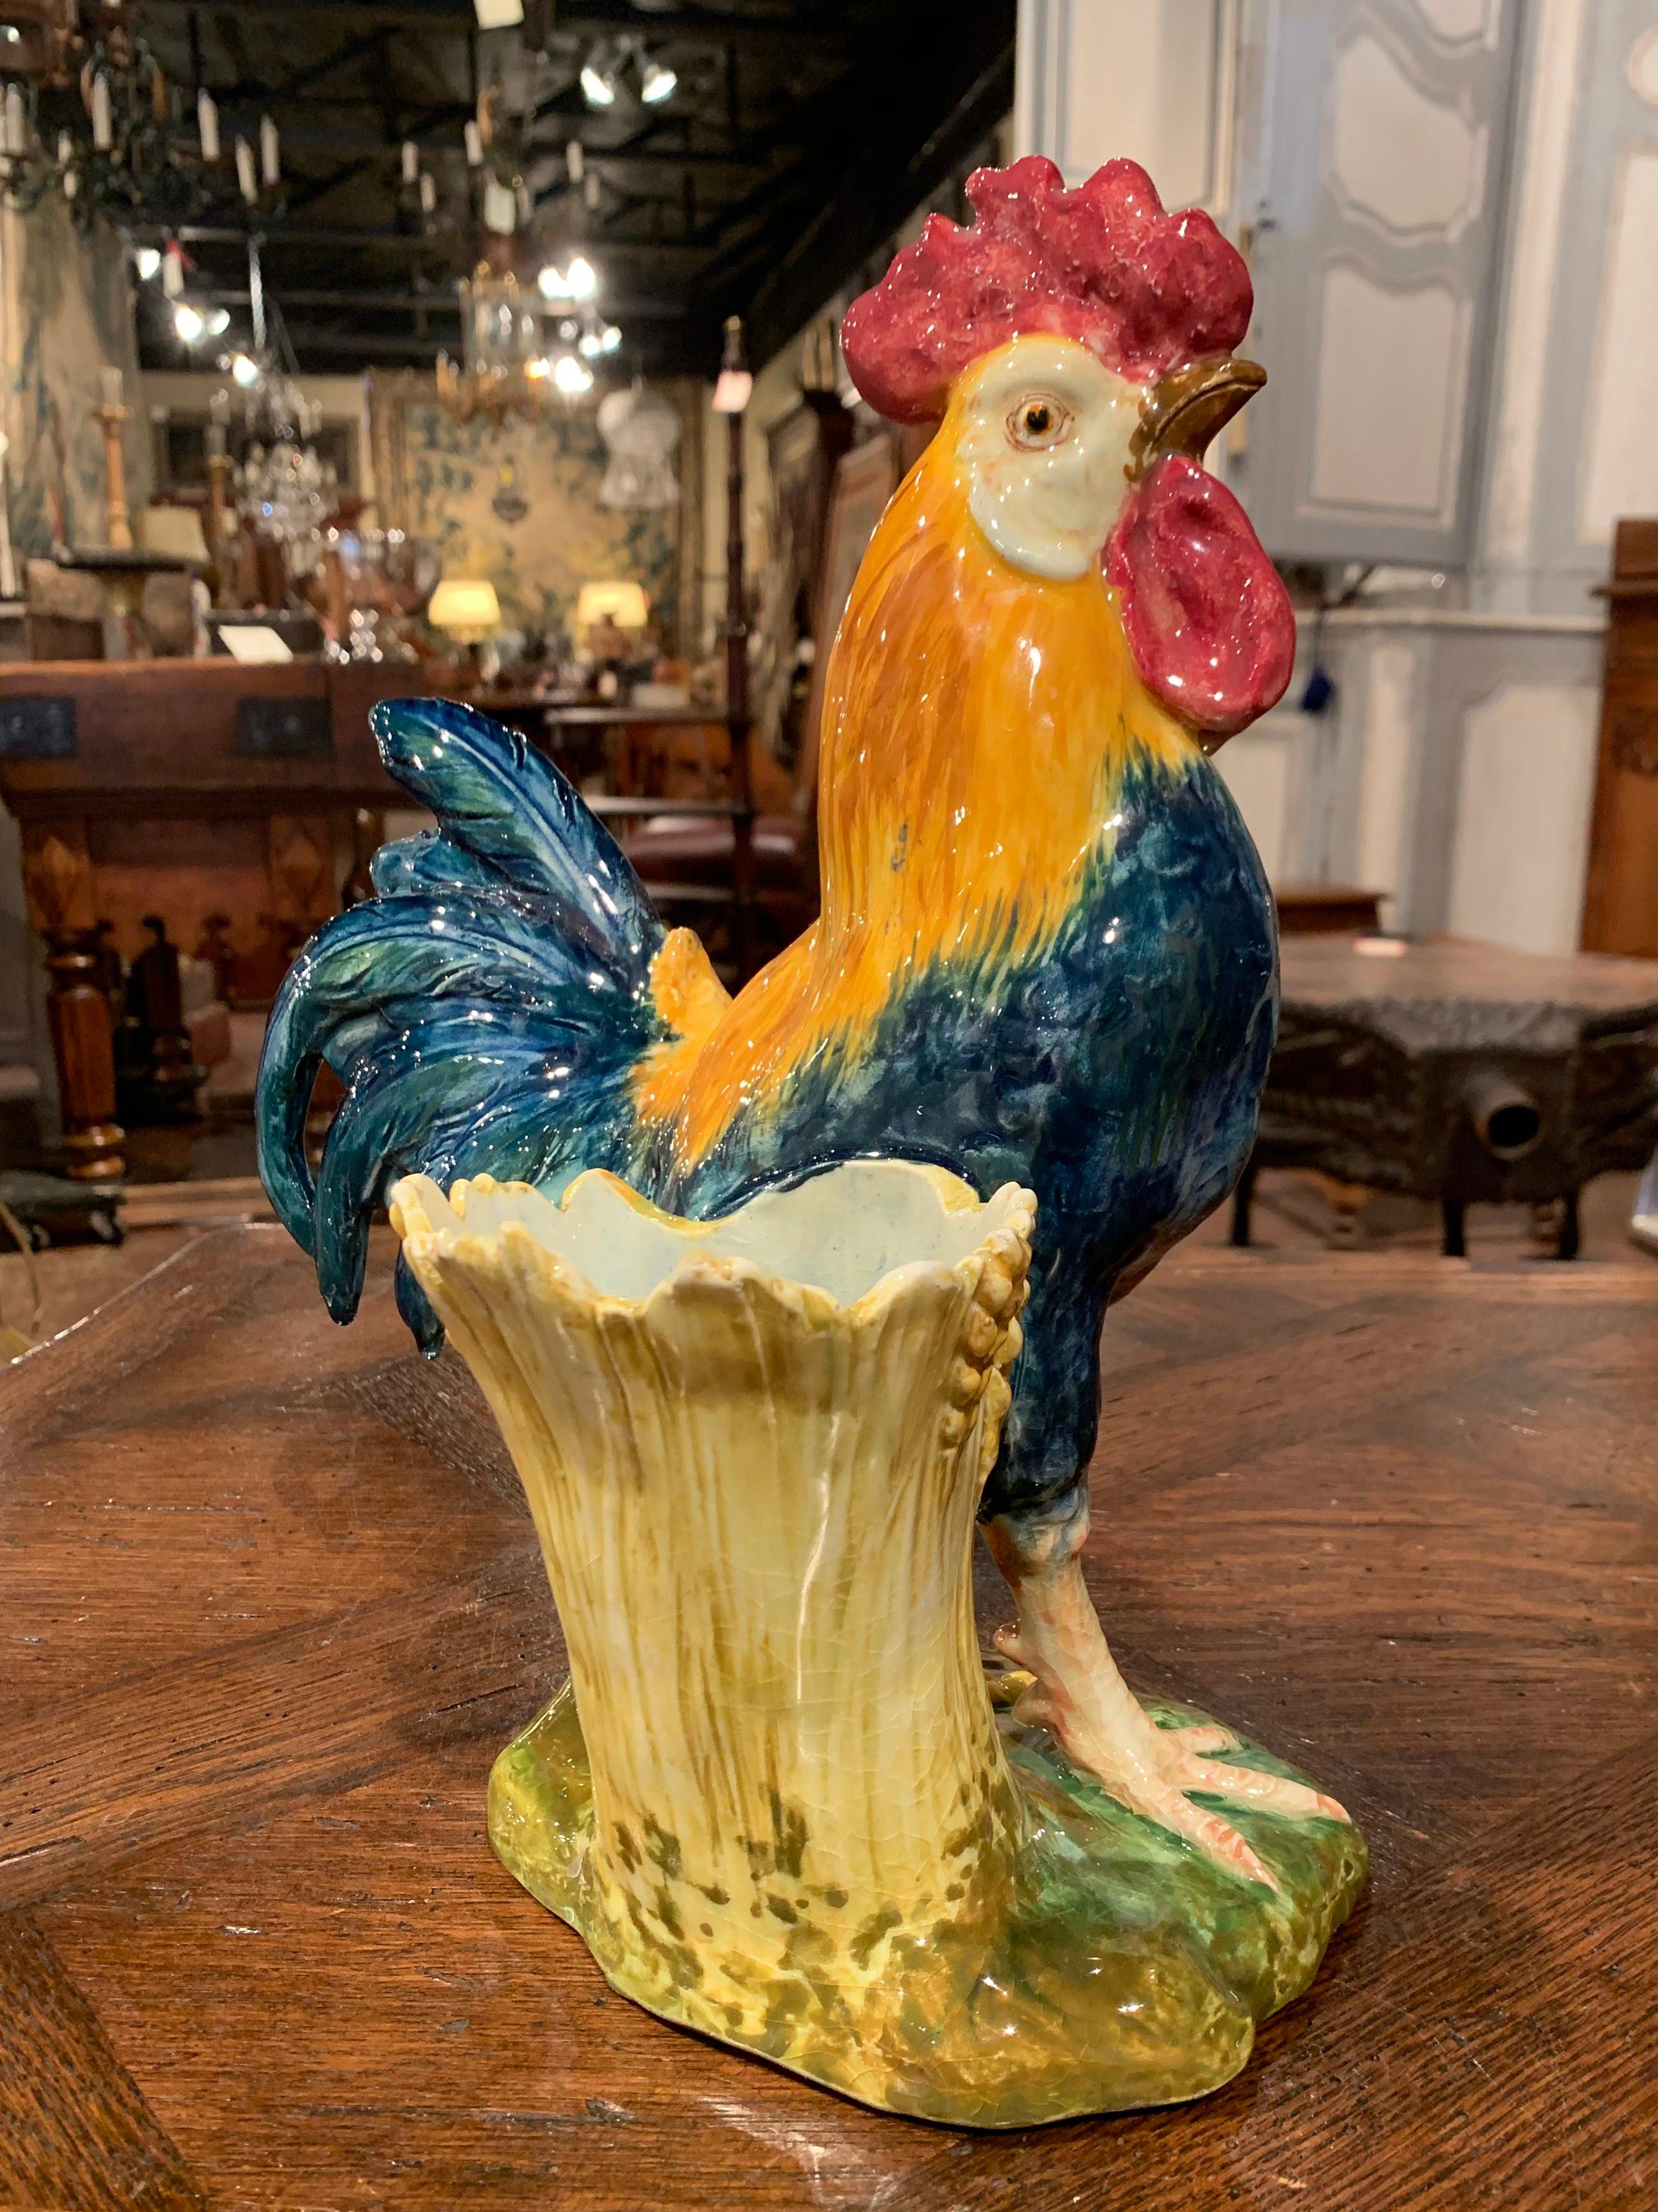 Bring the country French style into your home with this large, colorful, antique rooster figure with side vase. Crafted in France circa 1890, the chicken sculpture is a Classic French country home accessory. The porcelain bird is hand painted and